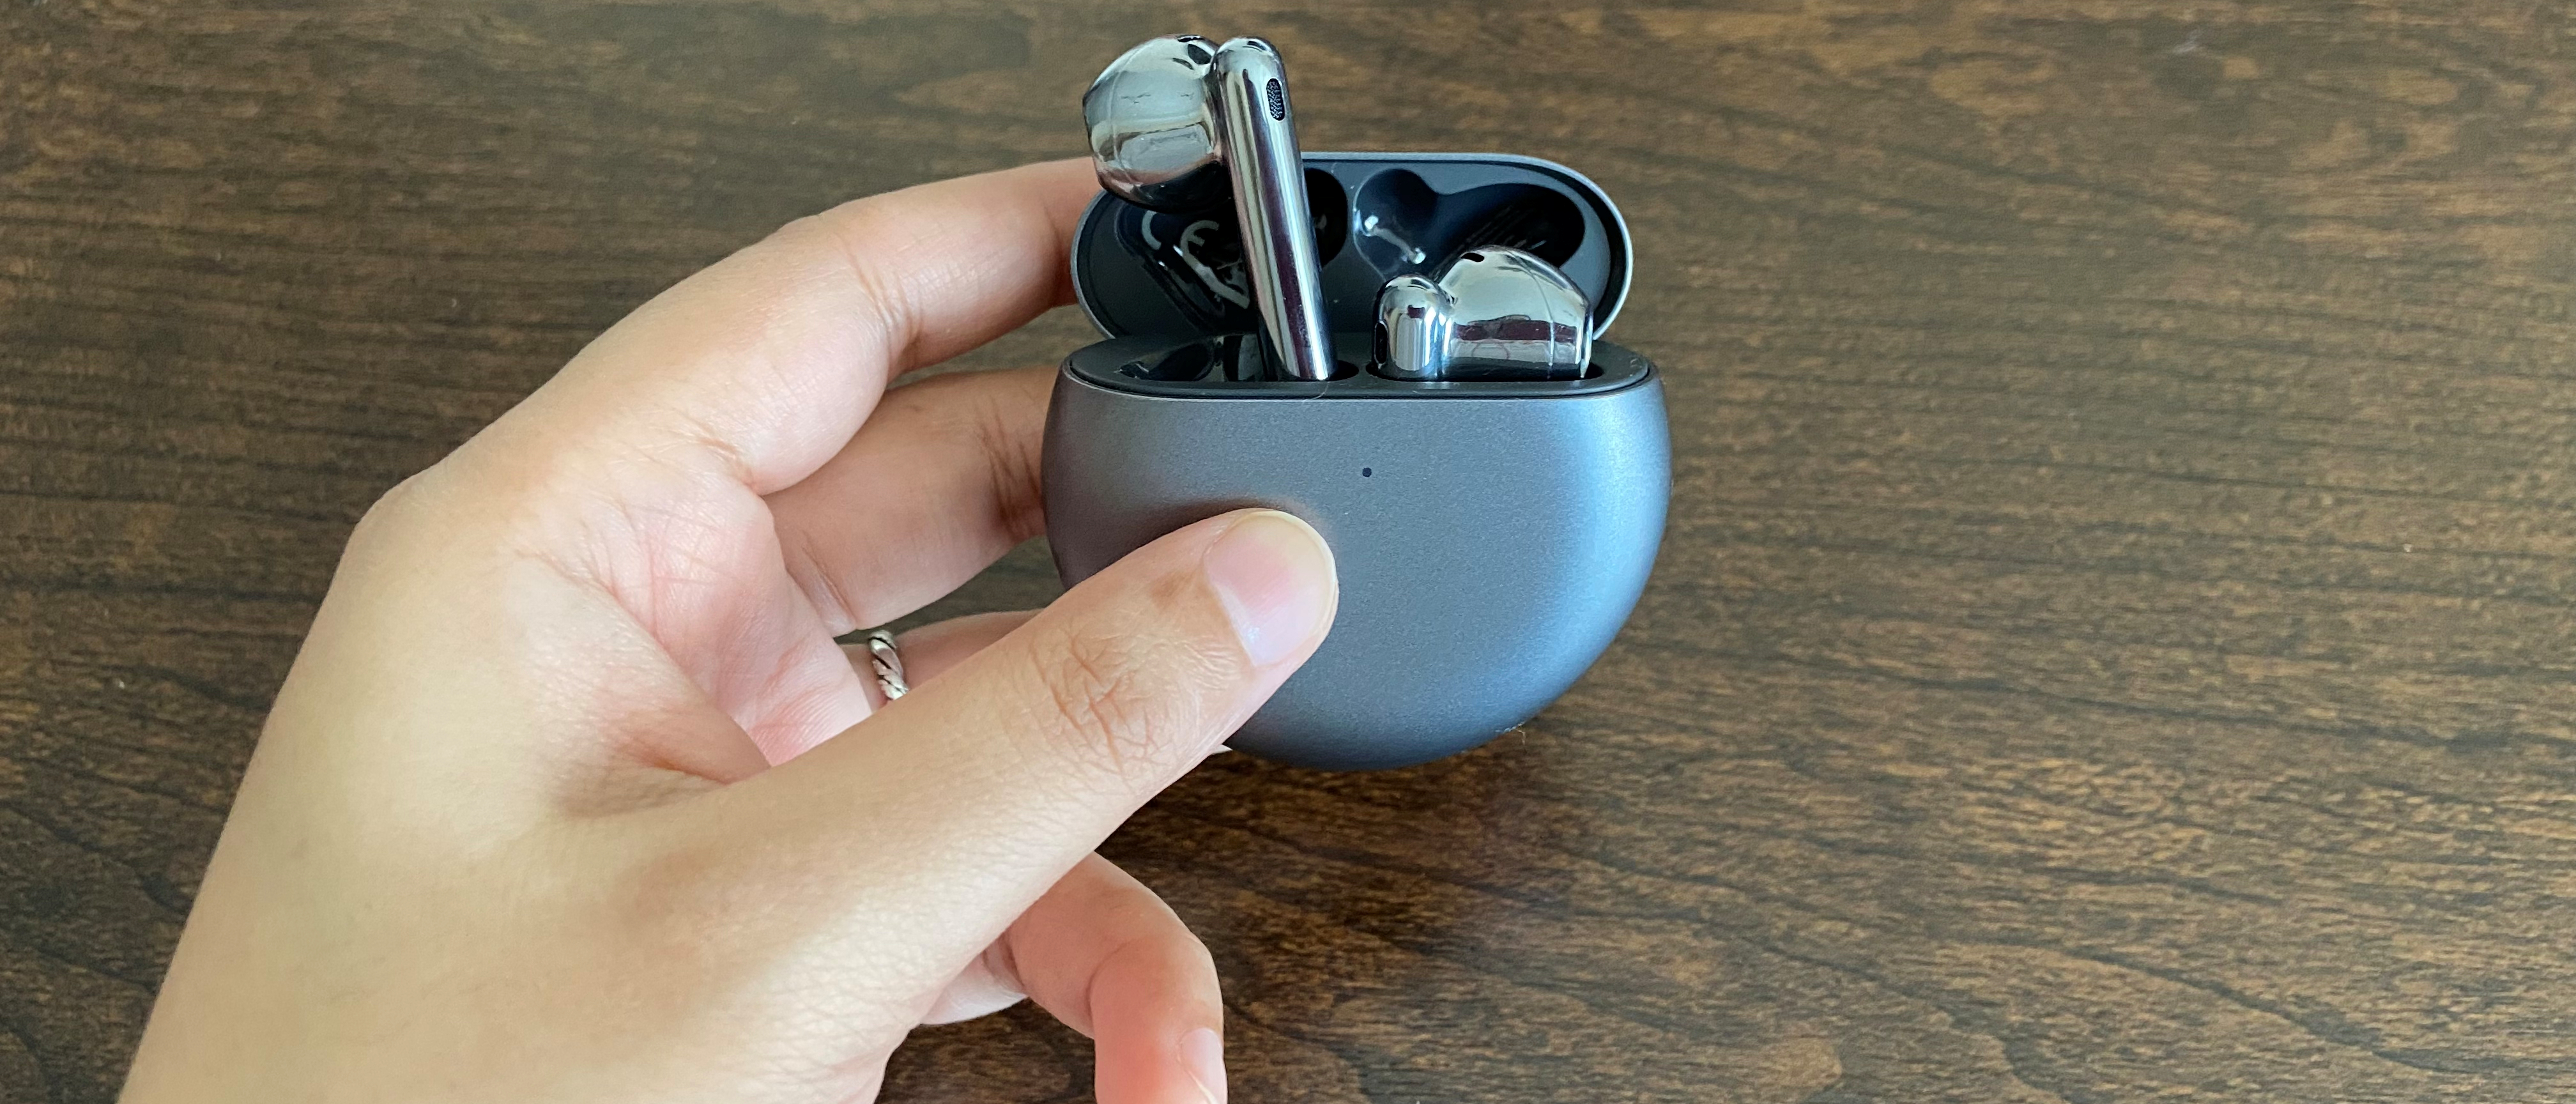 Huawei Freebuds 2 Pro Review - The Best Apple Airpod Alternative